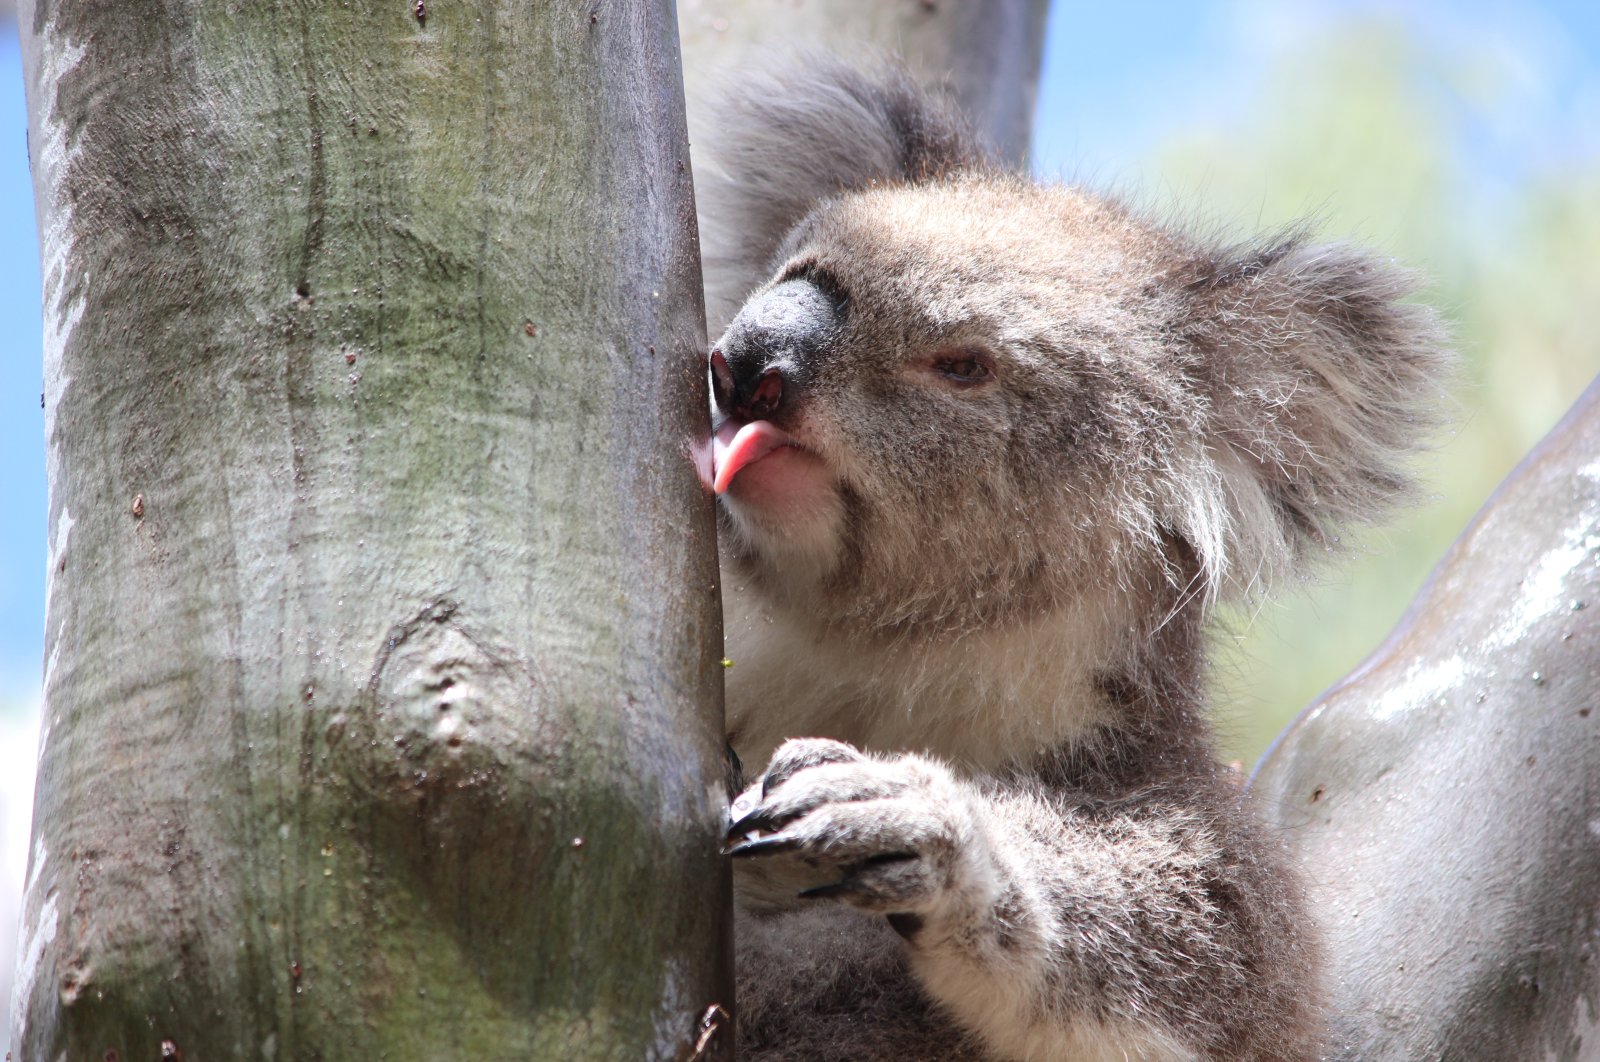 A female koala licks water off the smooth trunk of a eucalyptus tree after a rainfall in the You Yangs Regional Park, Victoria, Australia, May 4, 2020. (REUTERS Photo)